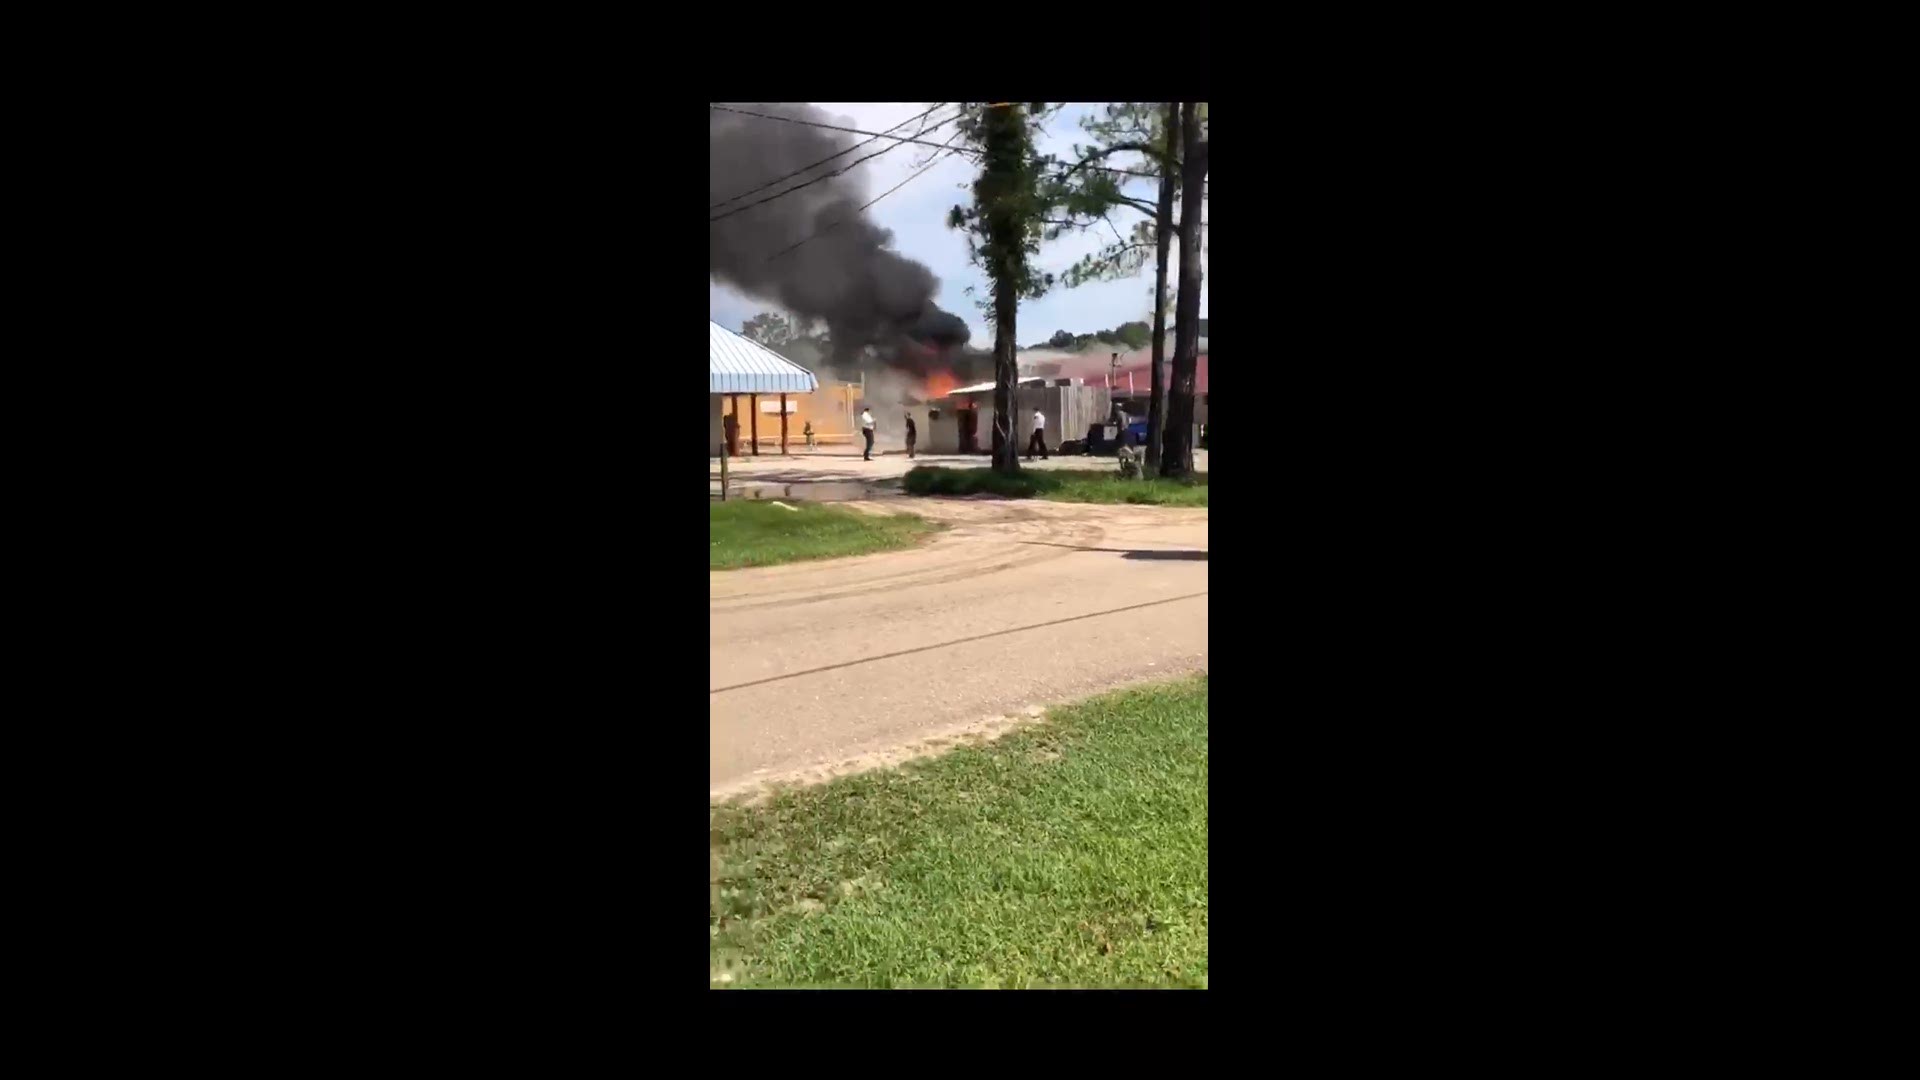 Local Mandeville favorite dining spot Liz's Where Y'at Diner badly burned Tuesday while diners and workers were on the scene. No one was apparently hurt.